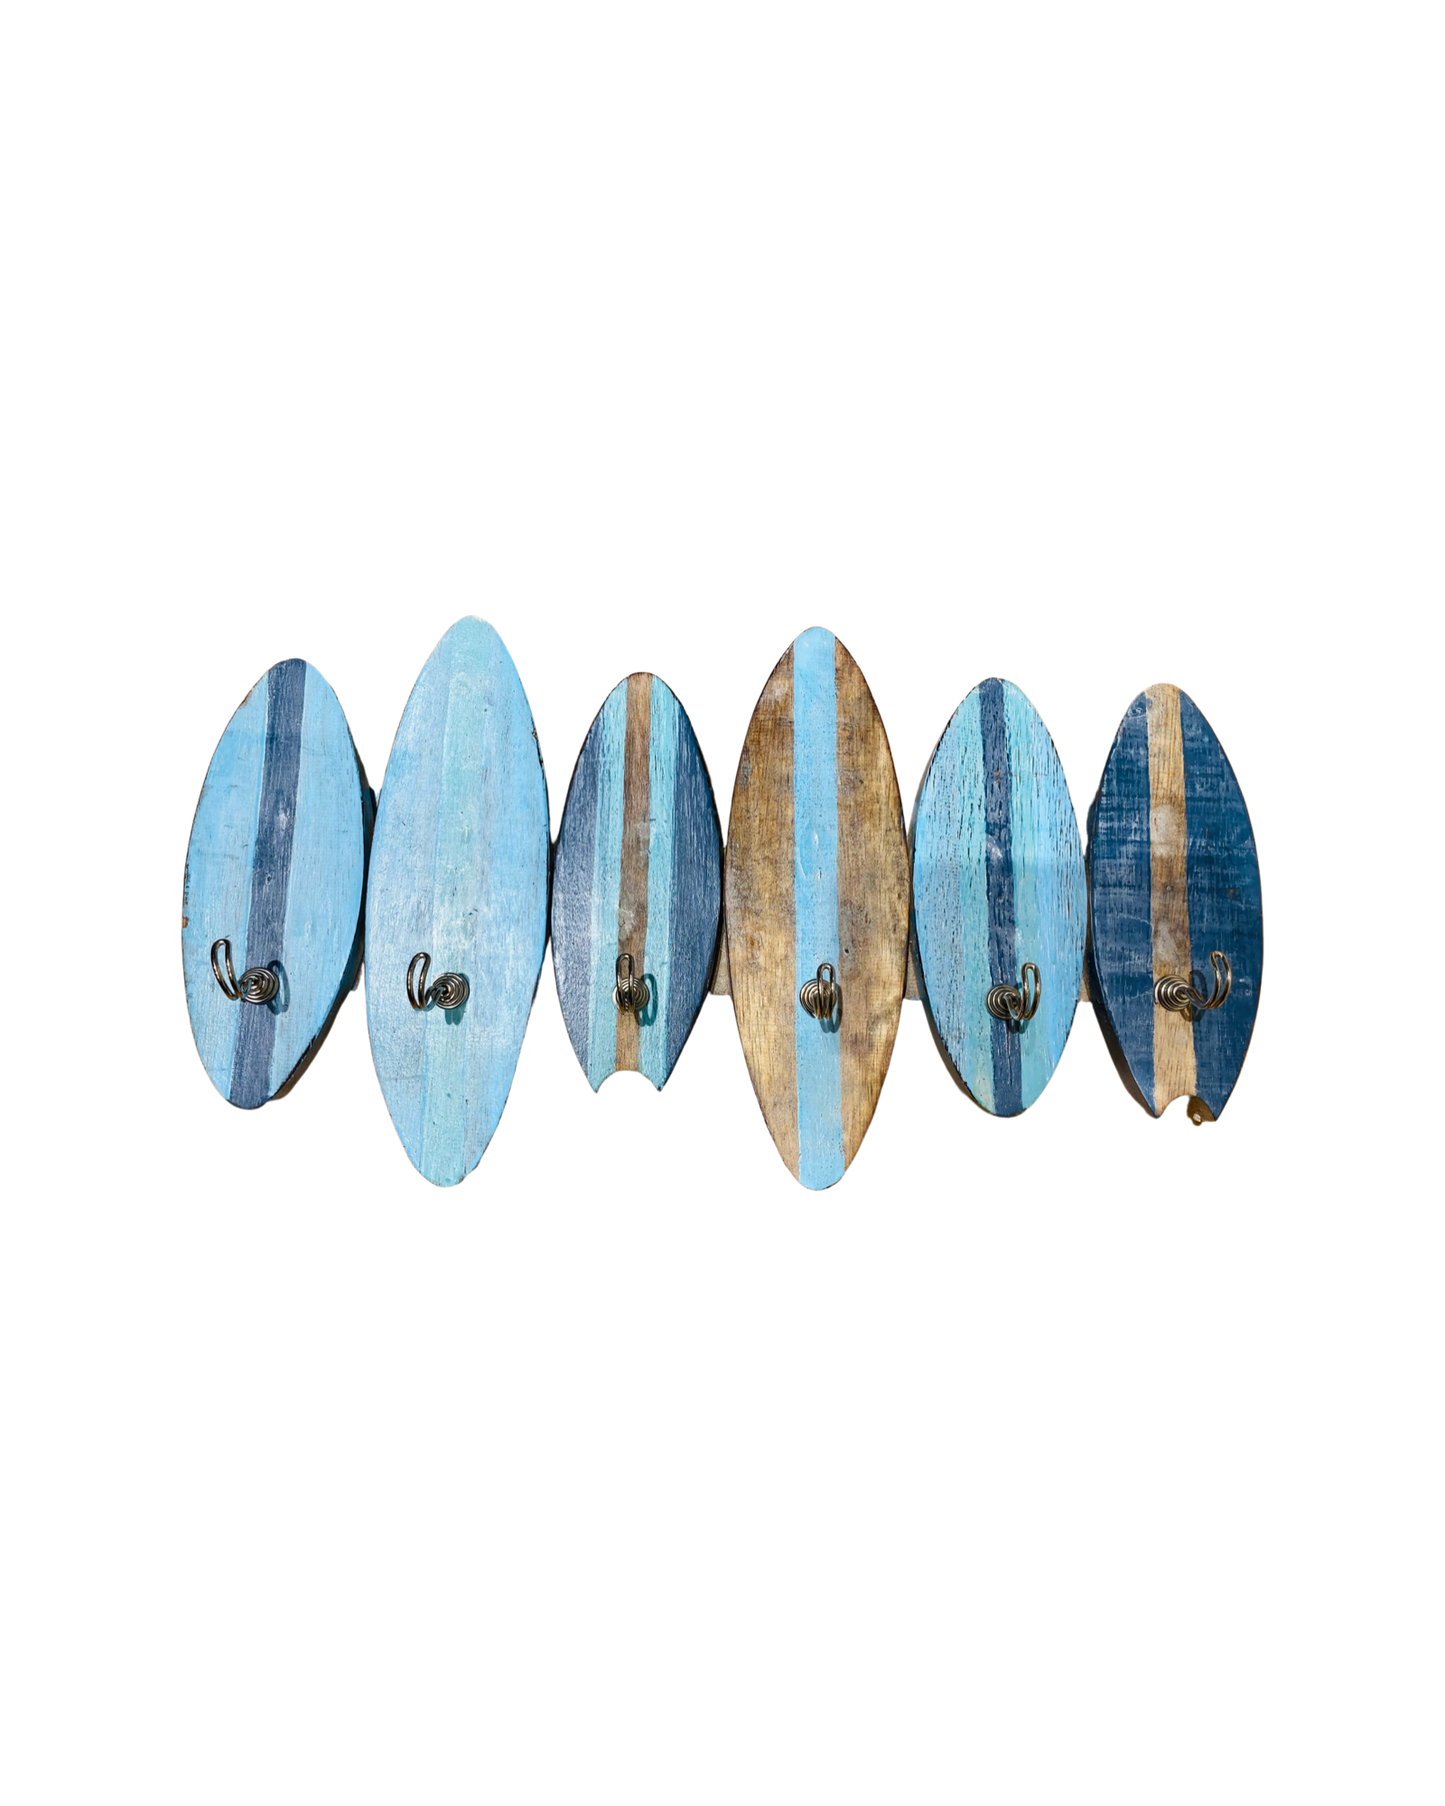 A wall art hanger with six carved surfboards in different shades on blue and six silver hangers to hold various items. 